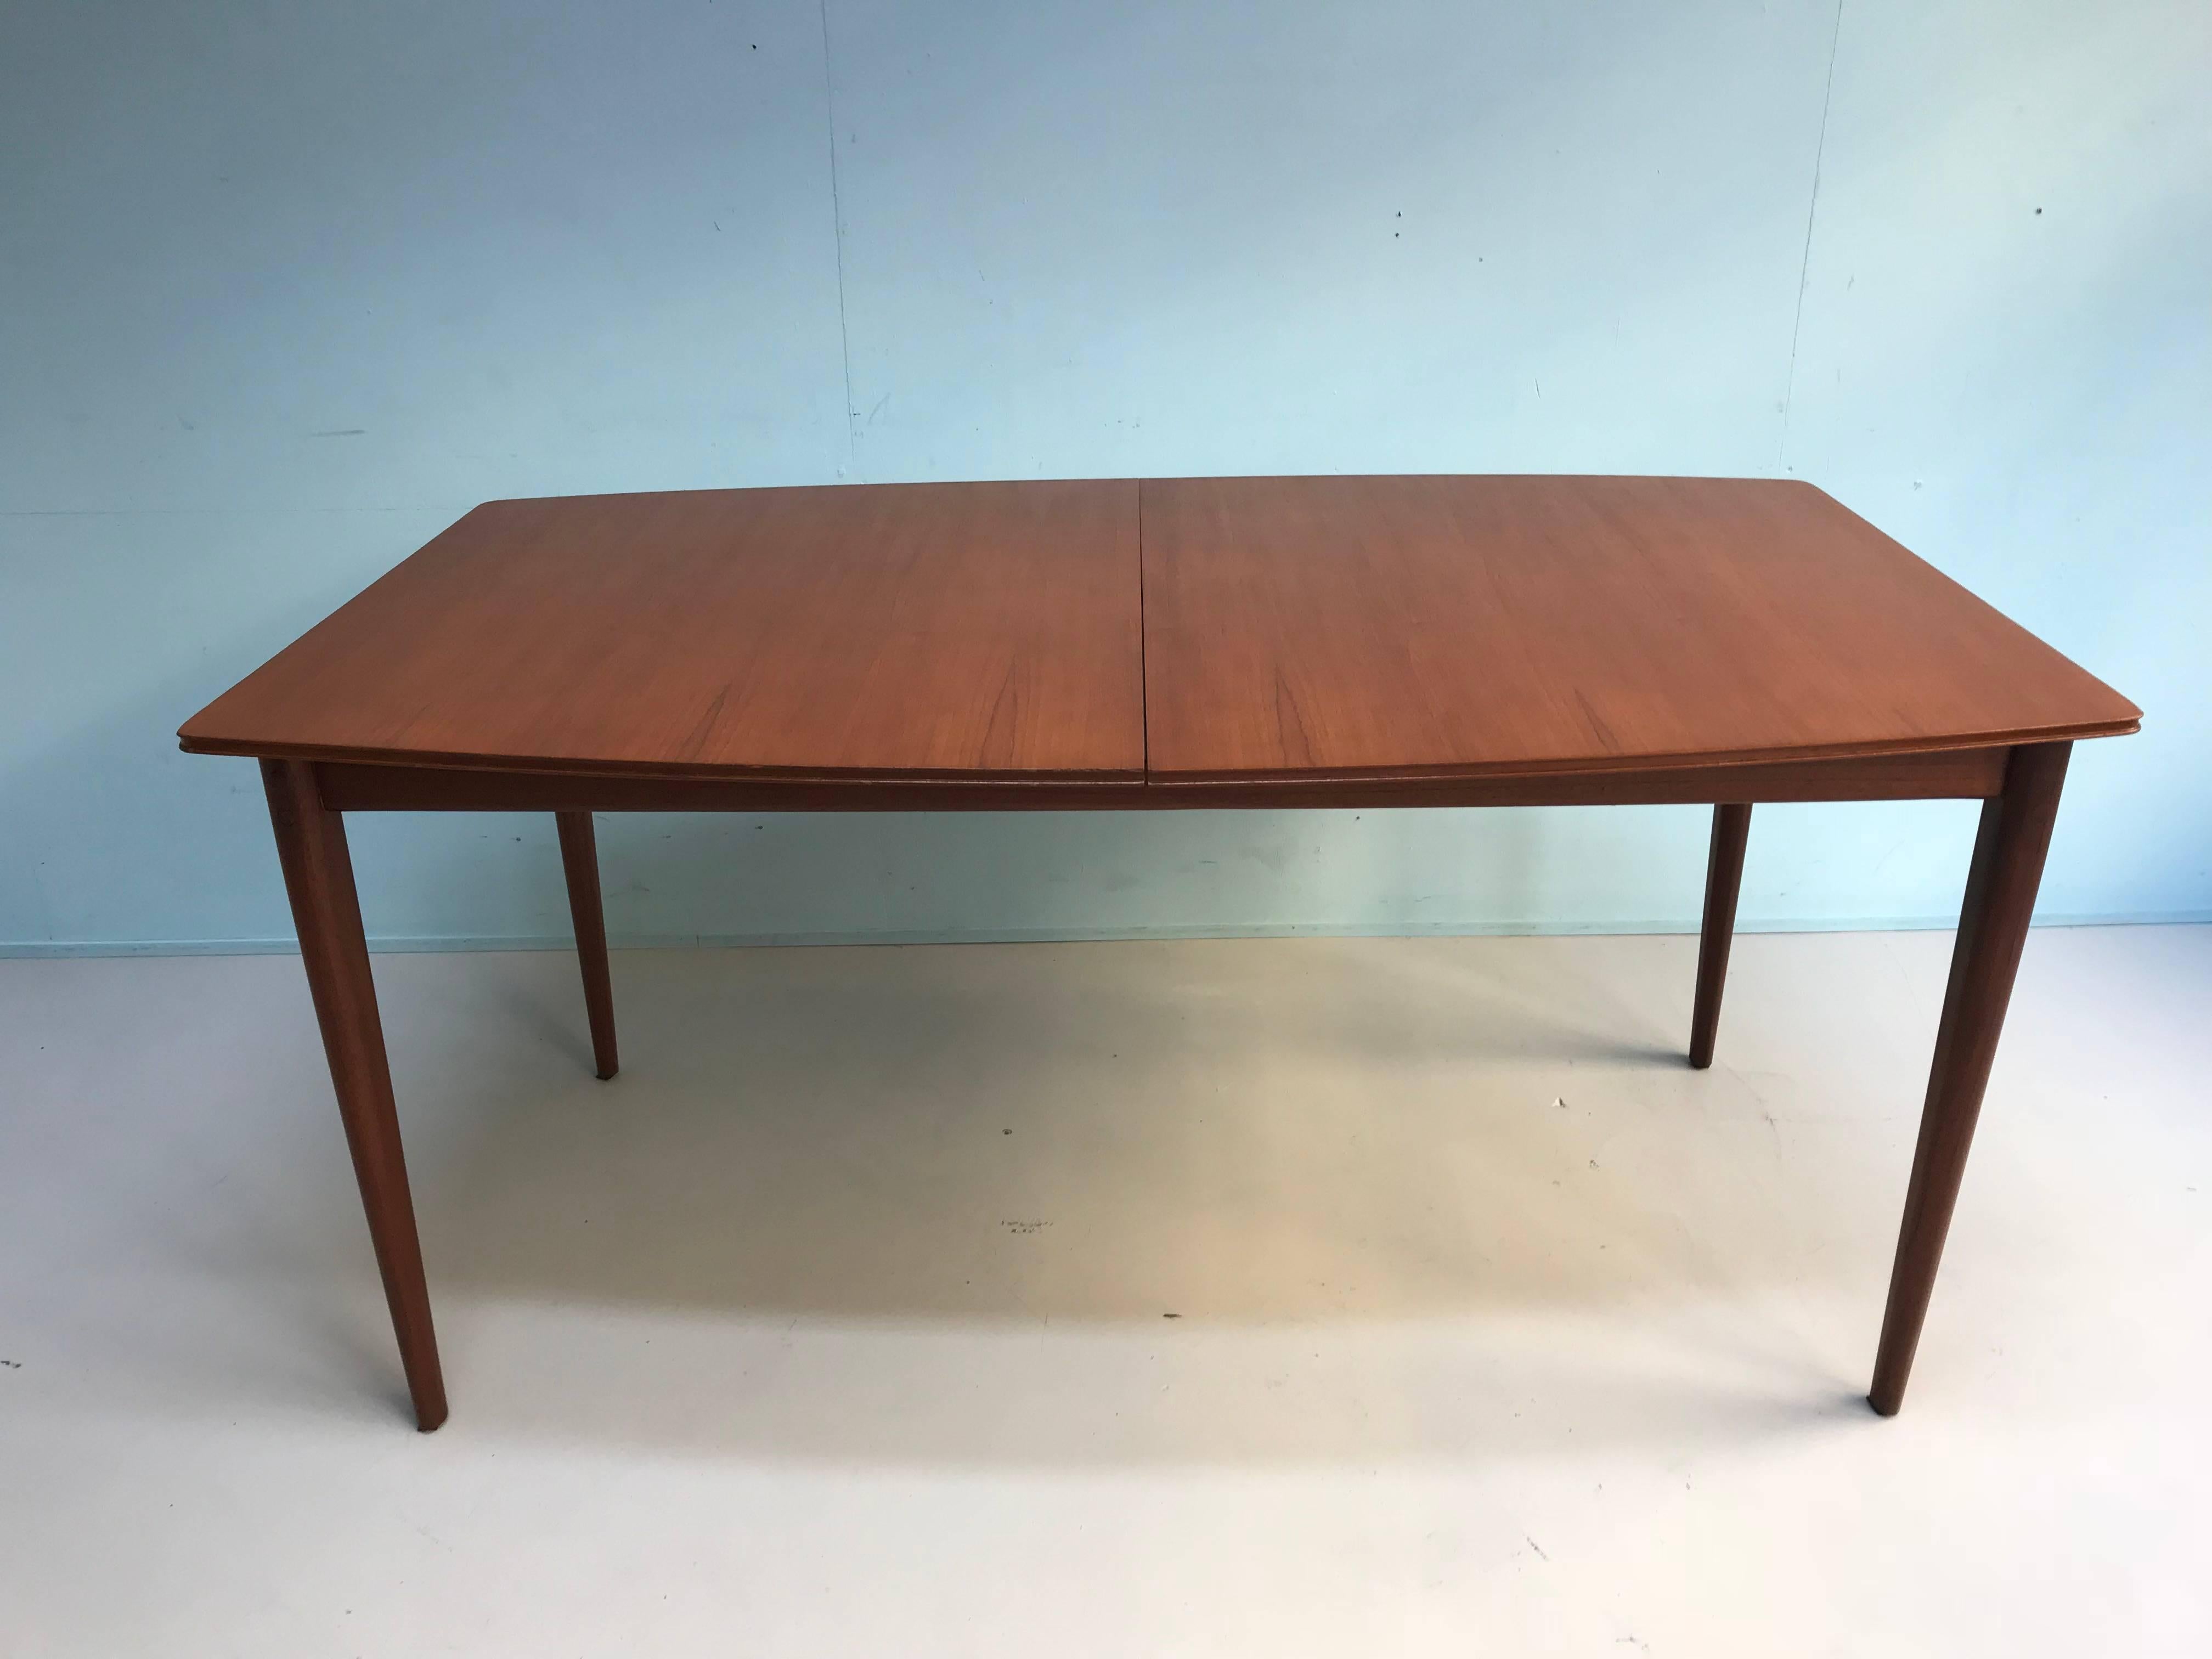 Macintosh dining table made of teak in a good condition.
Very genius system to make the table longer in two steps.
Condition: very good
period: 1960s

Measurements:
Normal:
152 cm W/91cm D/74 cm H
One step :
192 cm W/91 D/74 H
Two